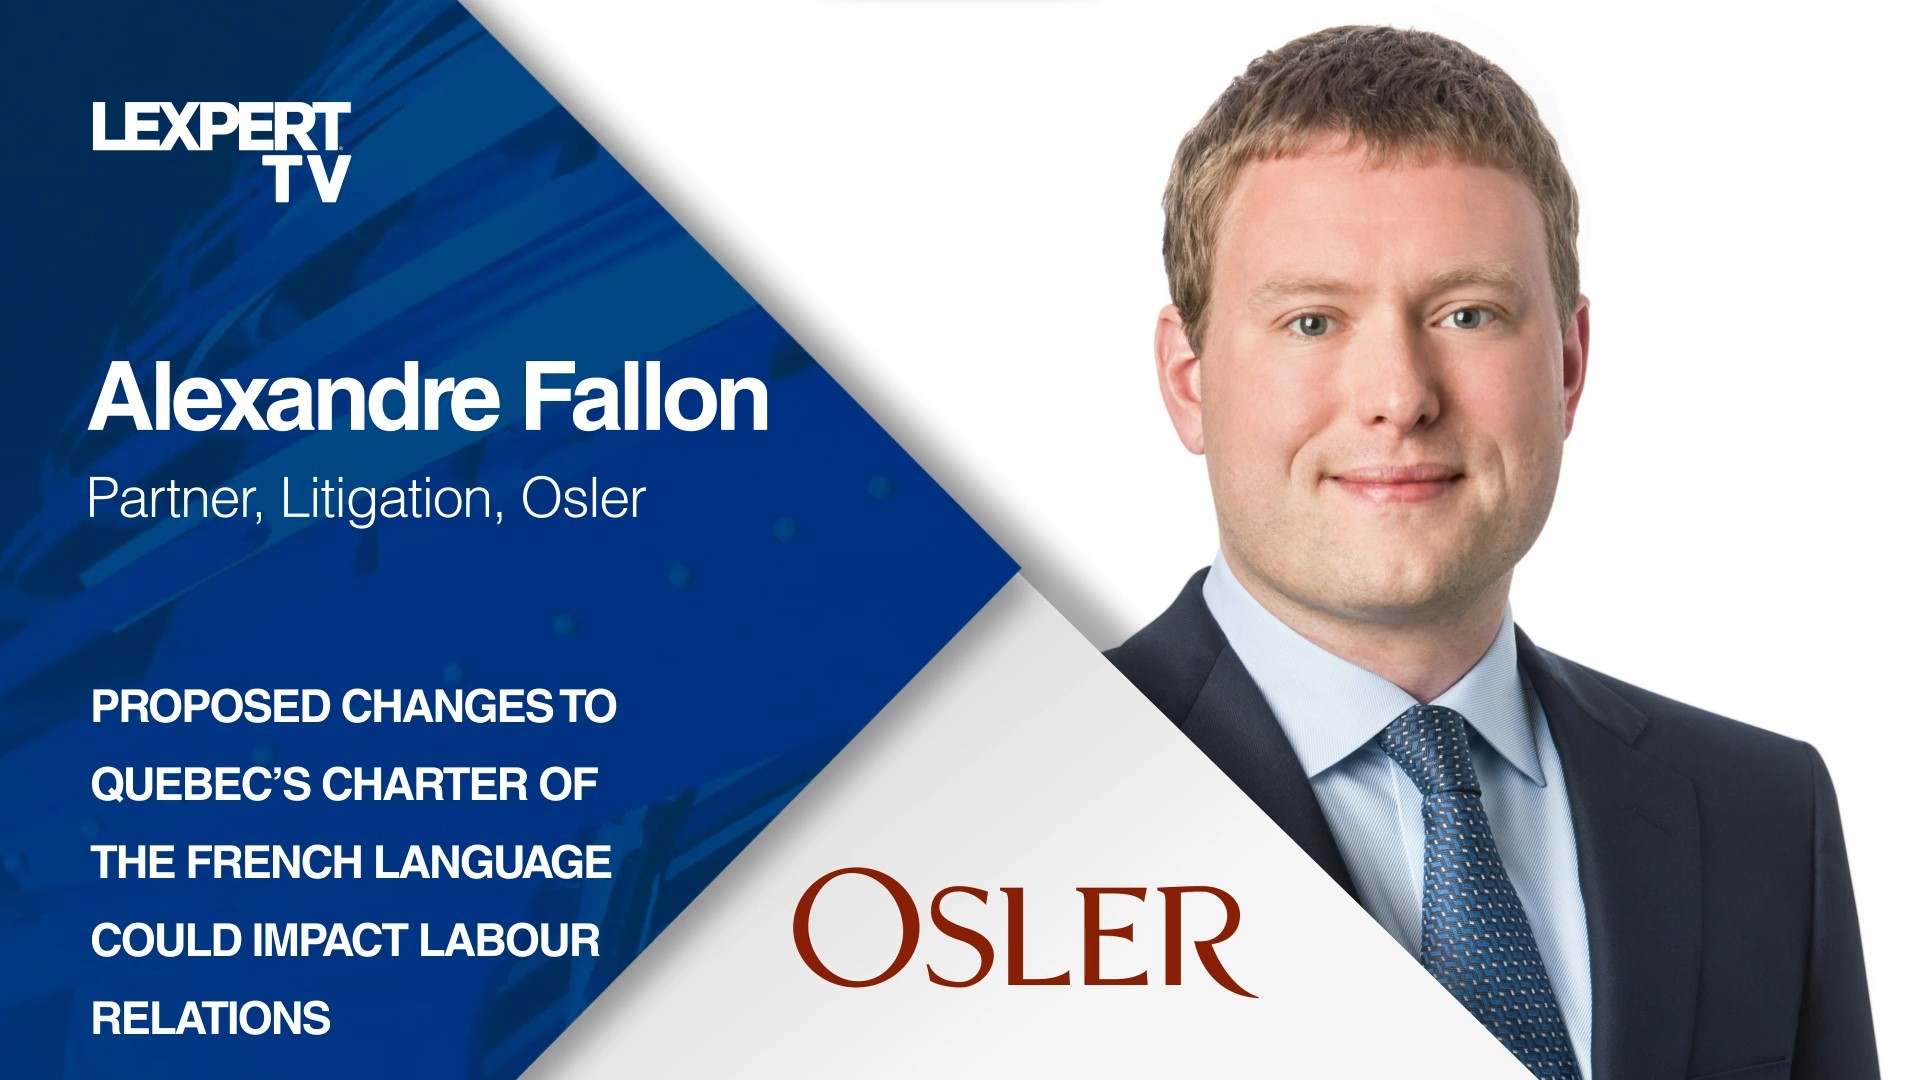 Alexandre Fallon at Osler on proposed changes to Quebec's Charter of the French Language